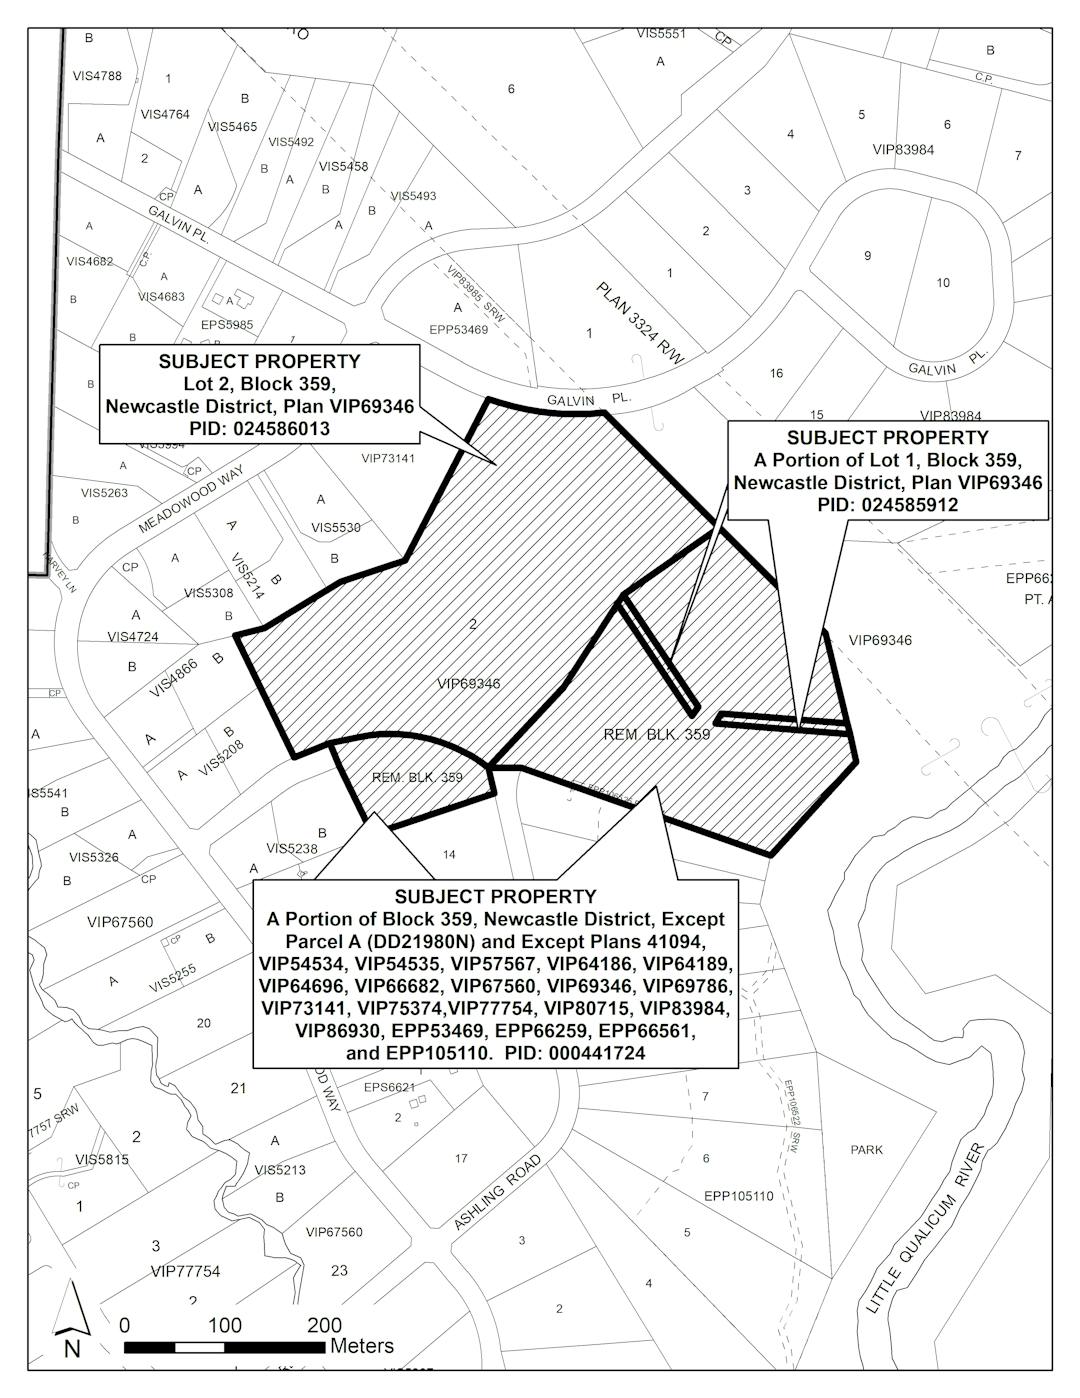 The RDN is currently looking for your input on zoning amendment application PL2021-048.